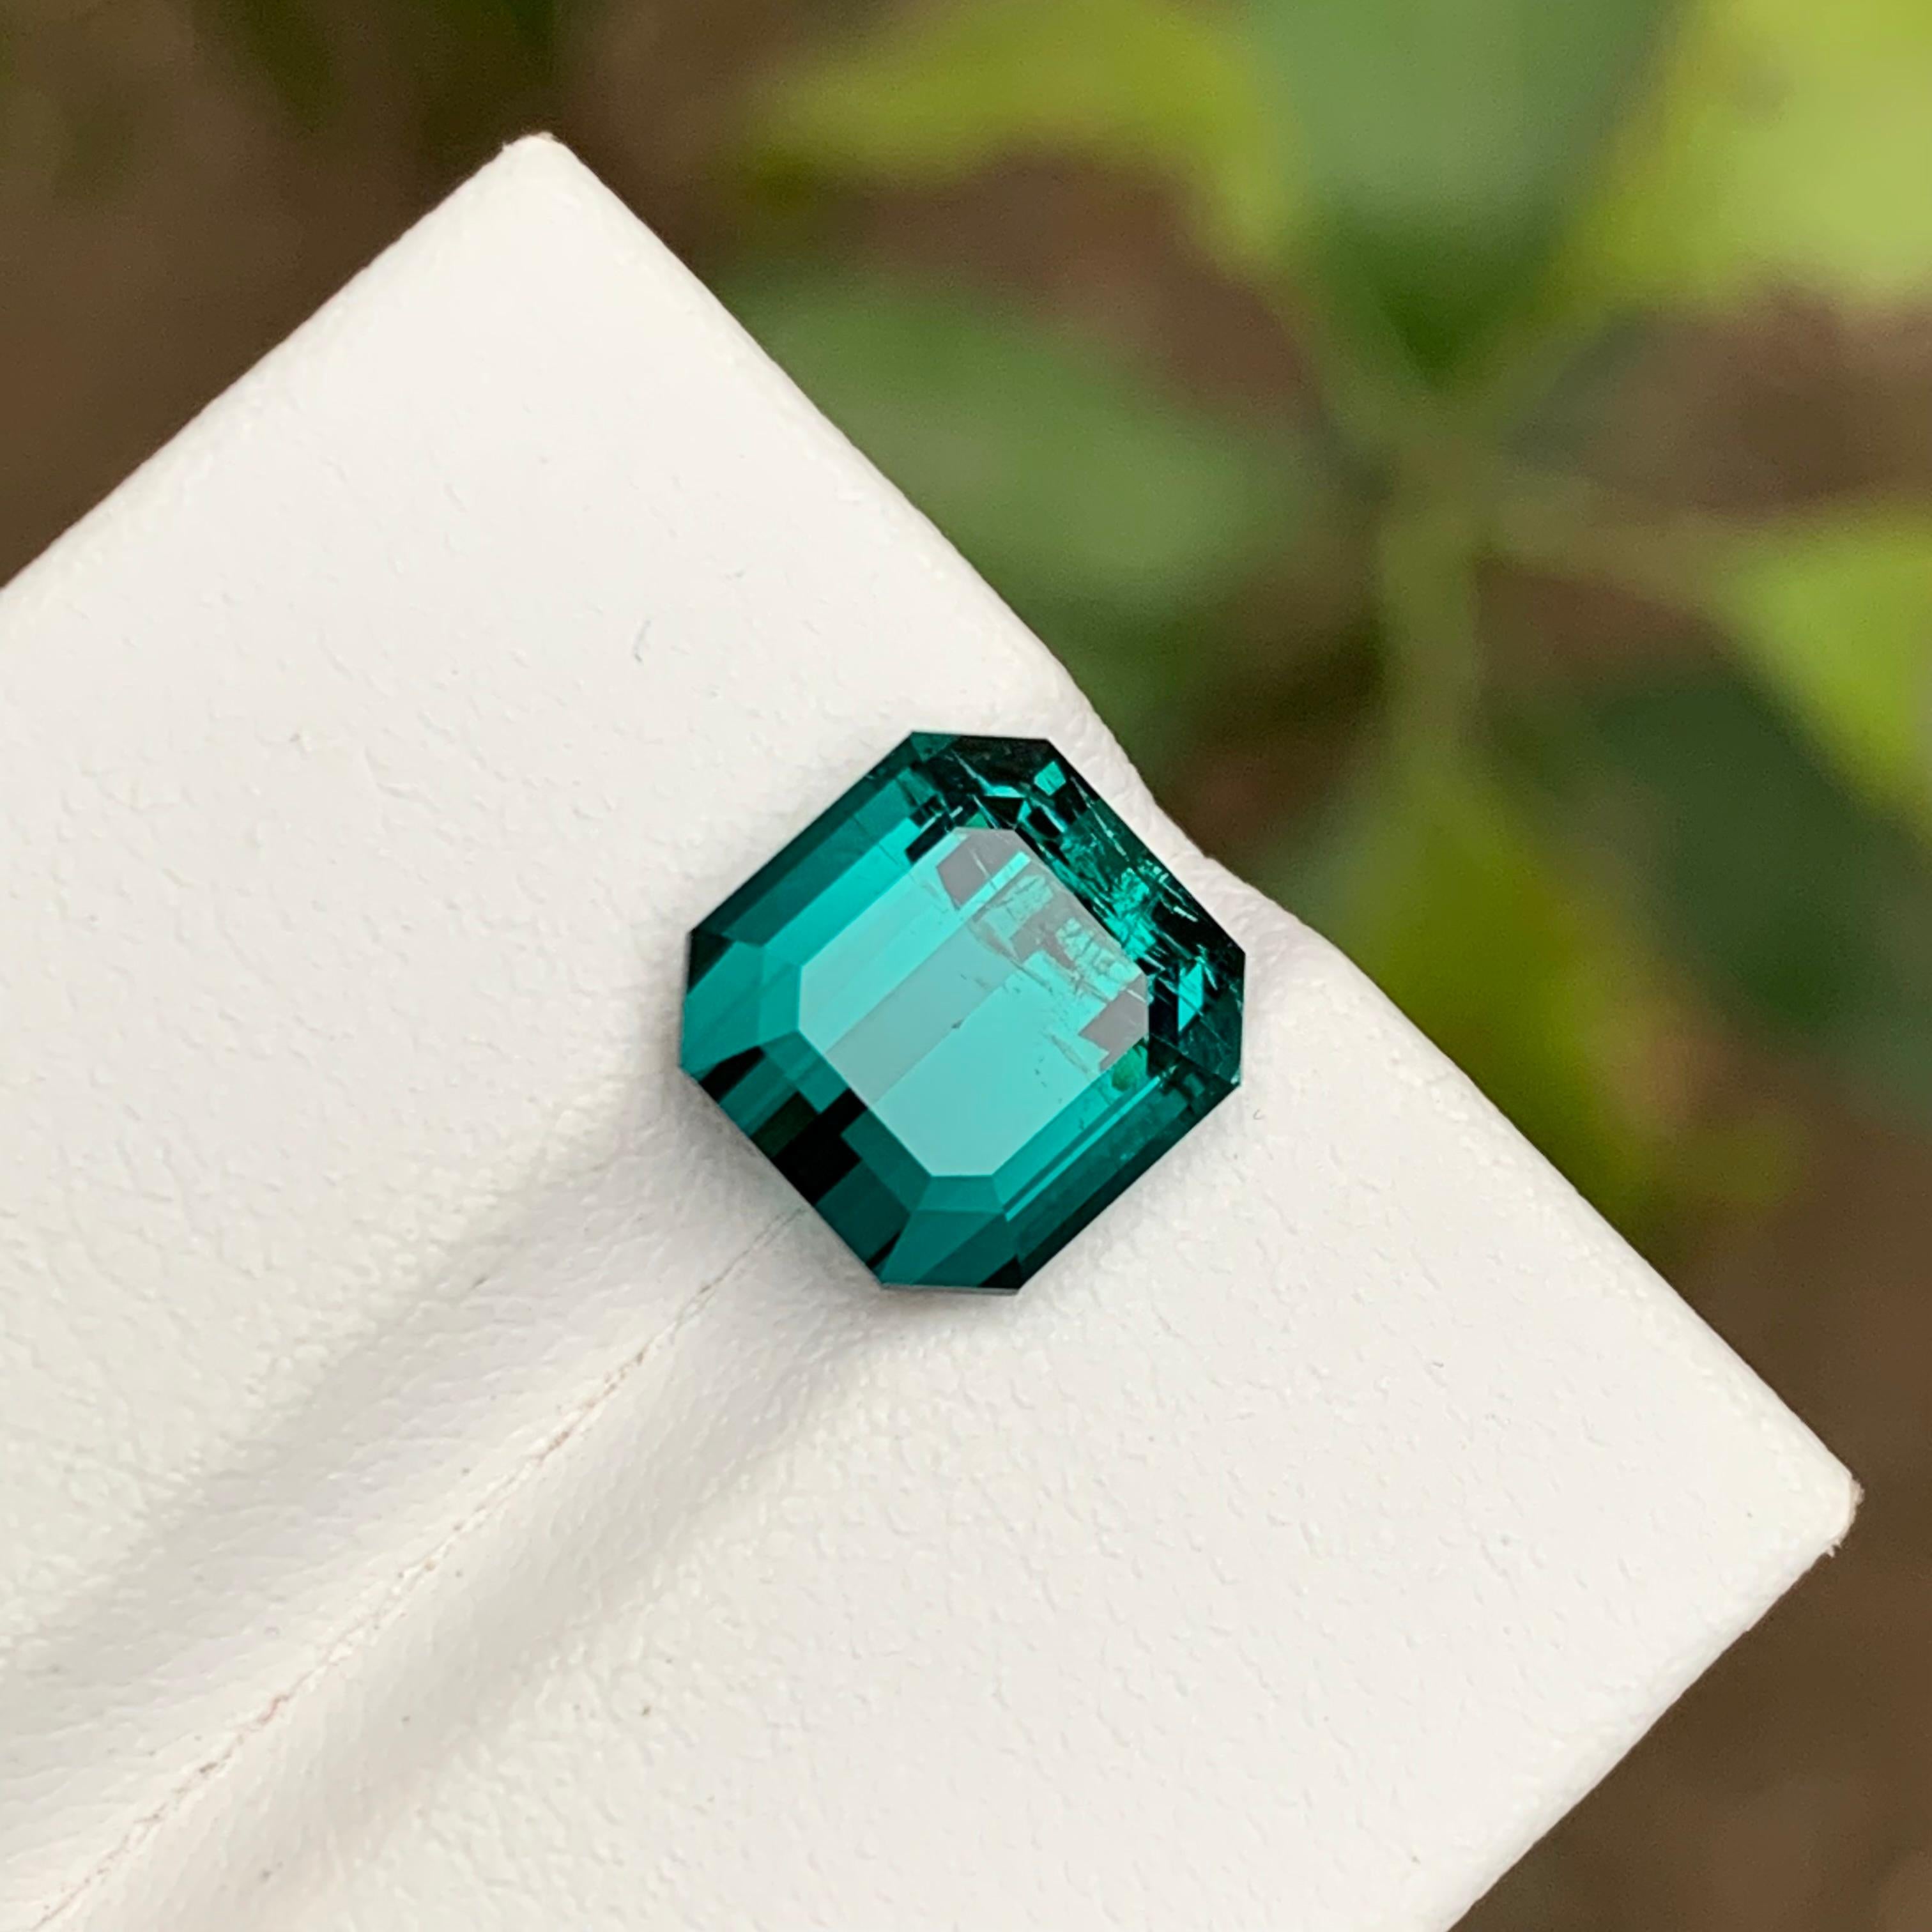 Rare Vibrant Lagoon Blue Natural Tourmaline Gemstone 4.20Ct Emerald Cut for Ring For Sale 2